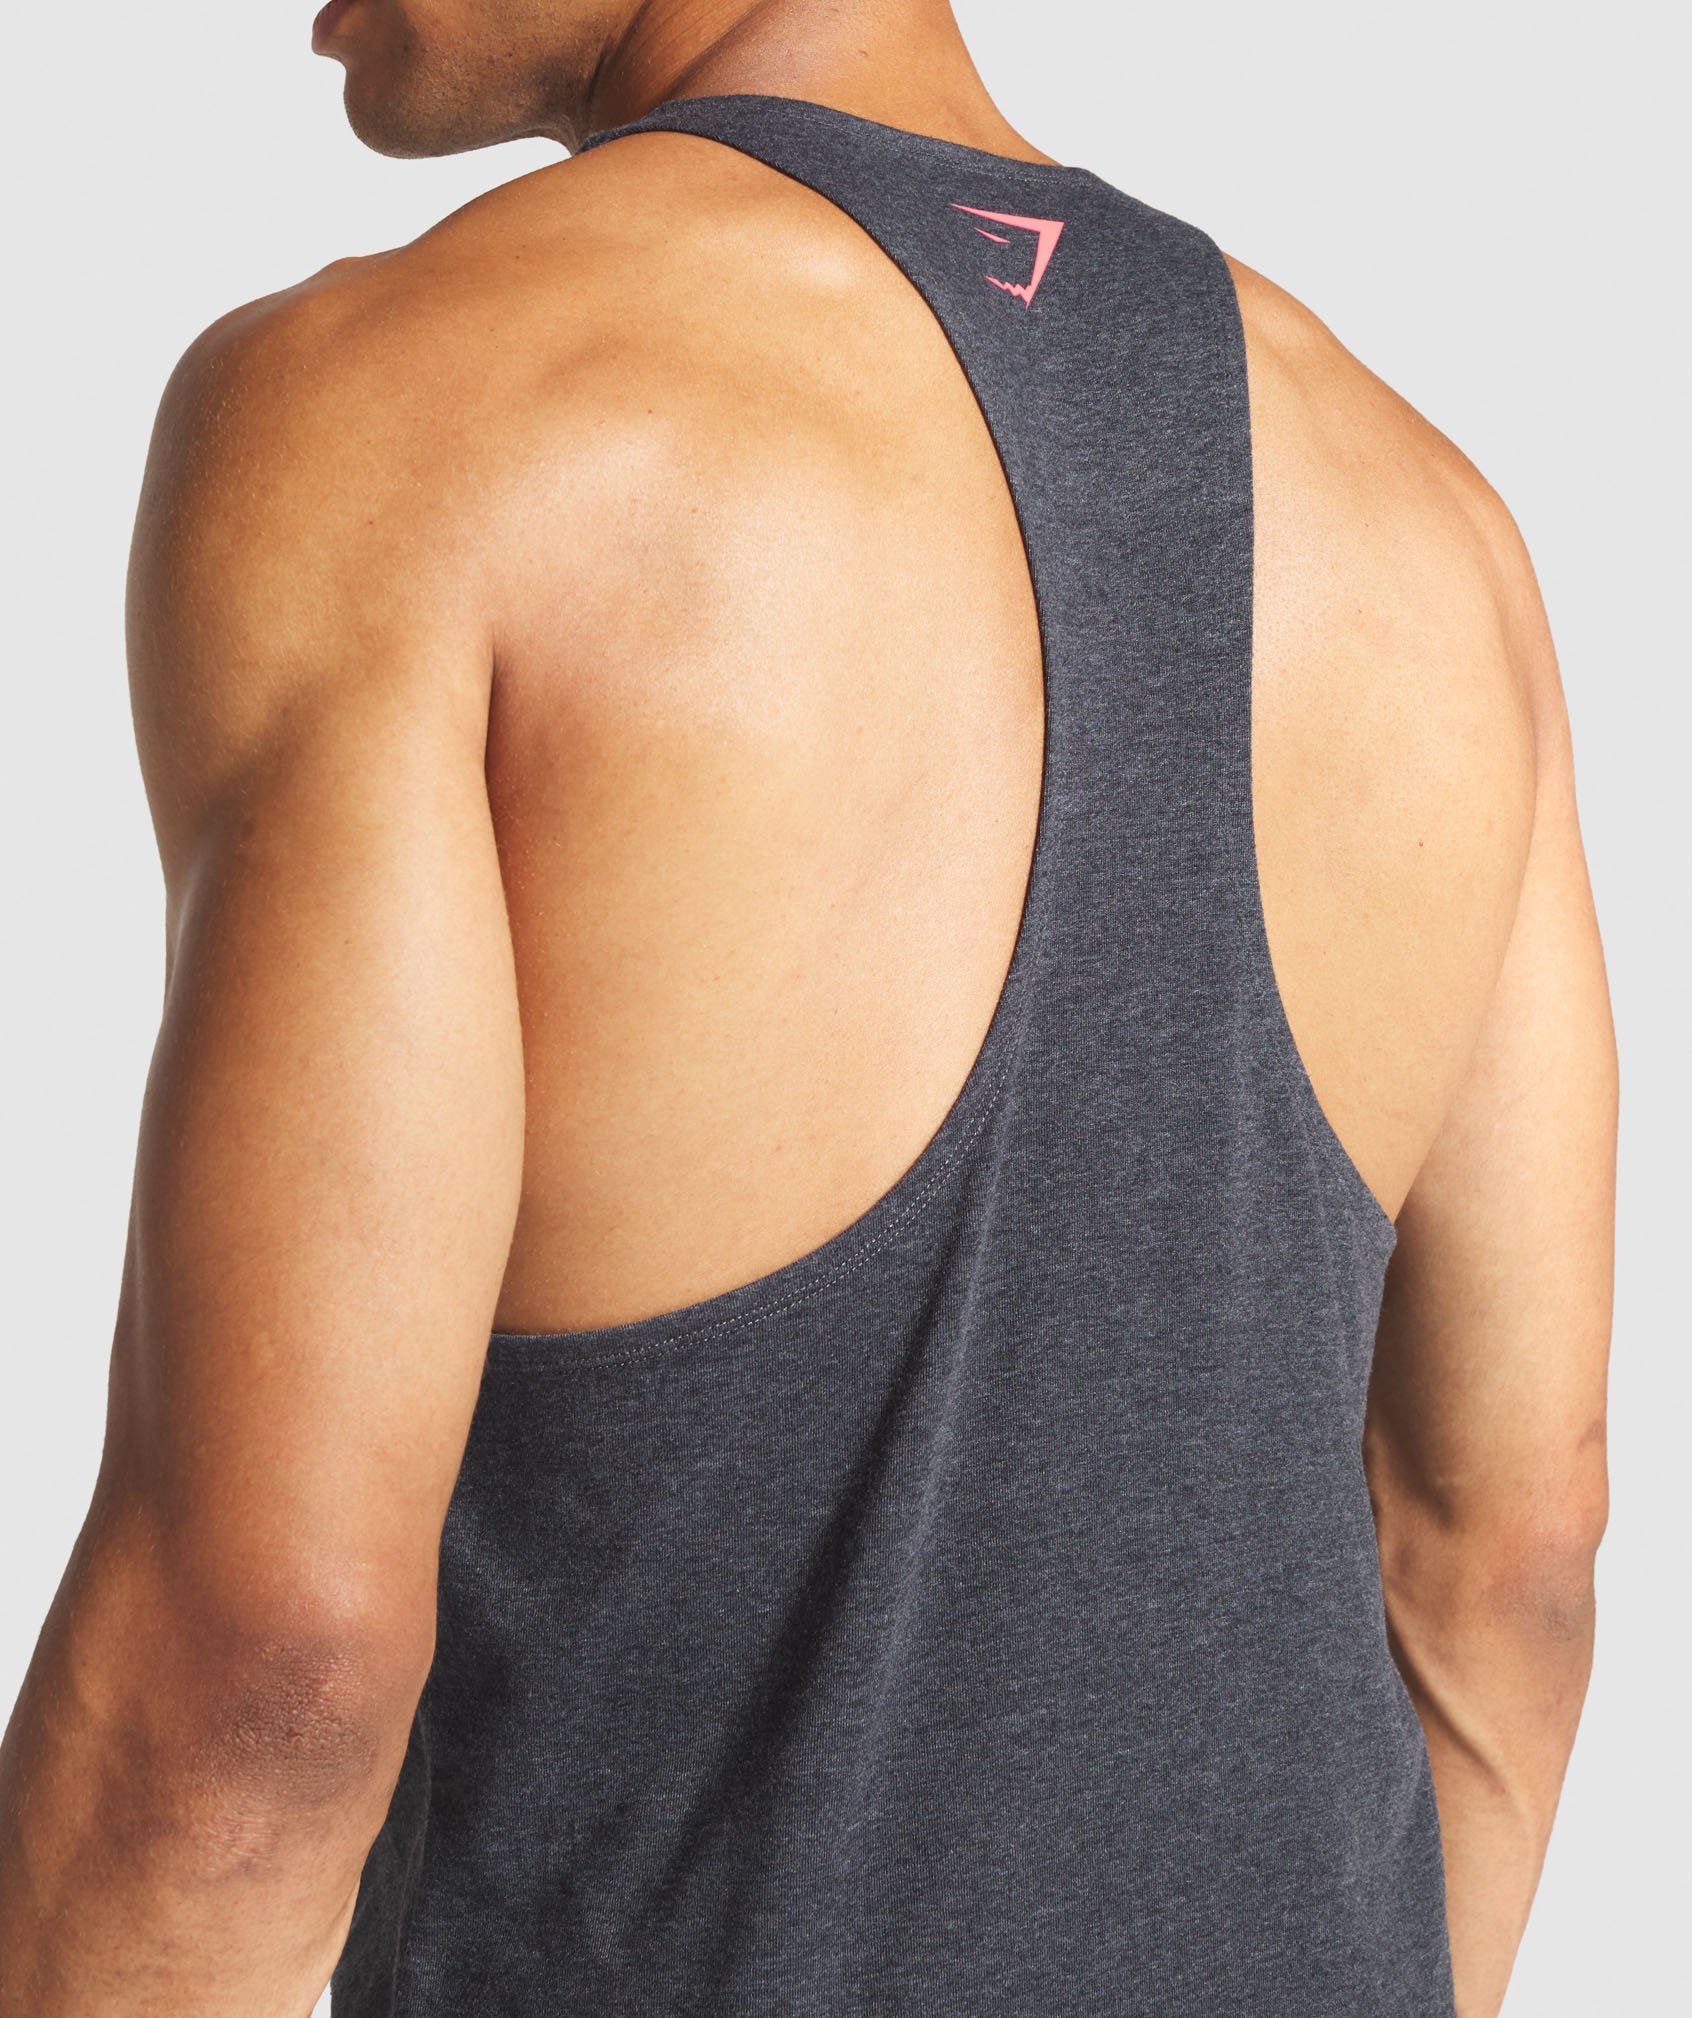 Graphic Extrude Stringer in Black Marl